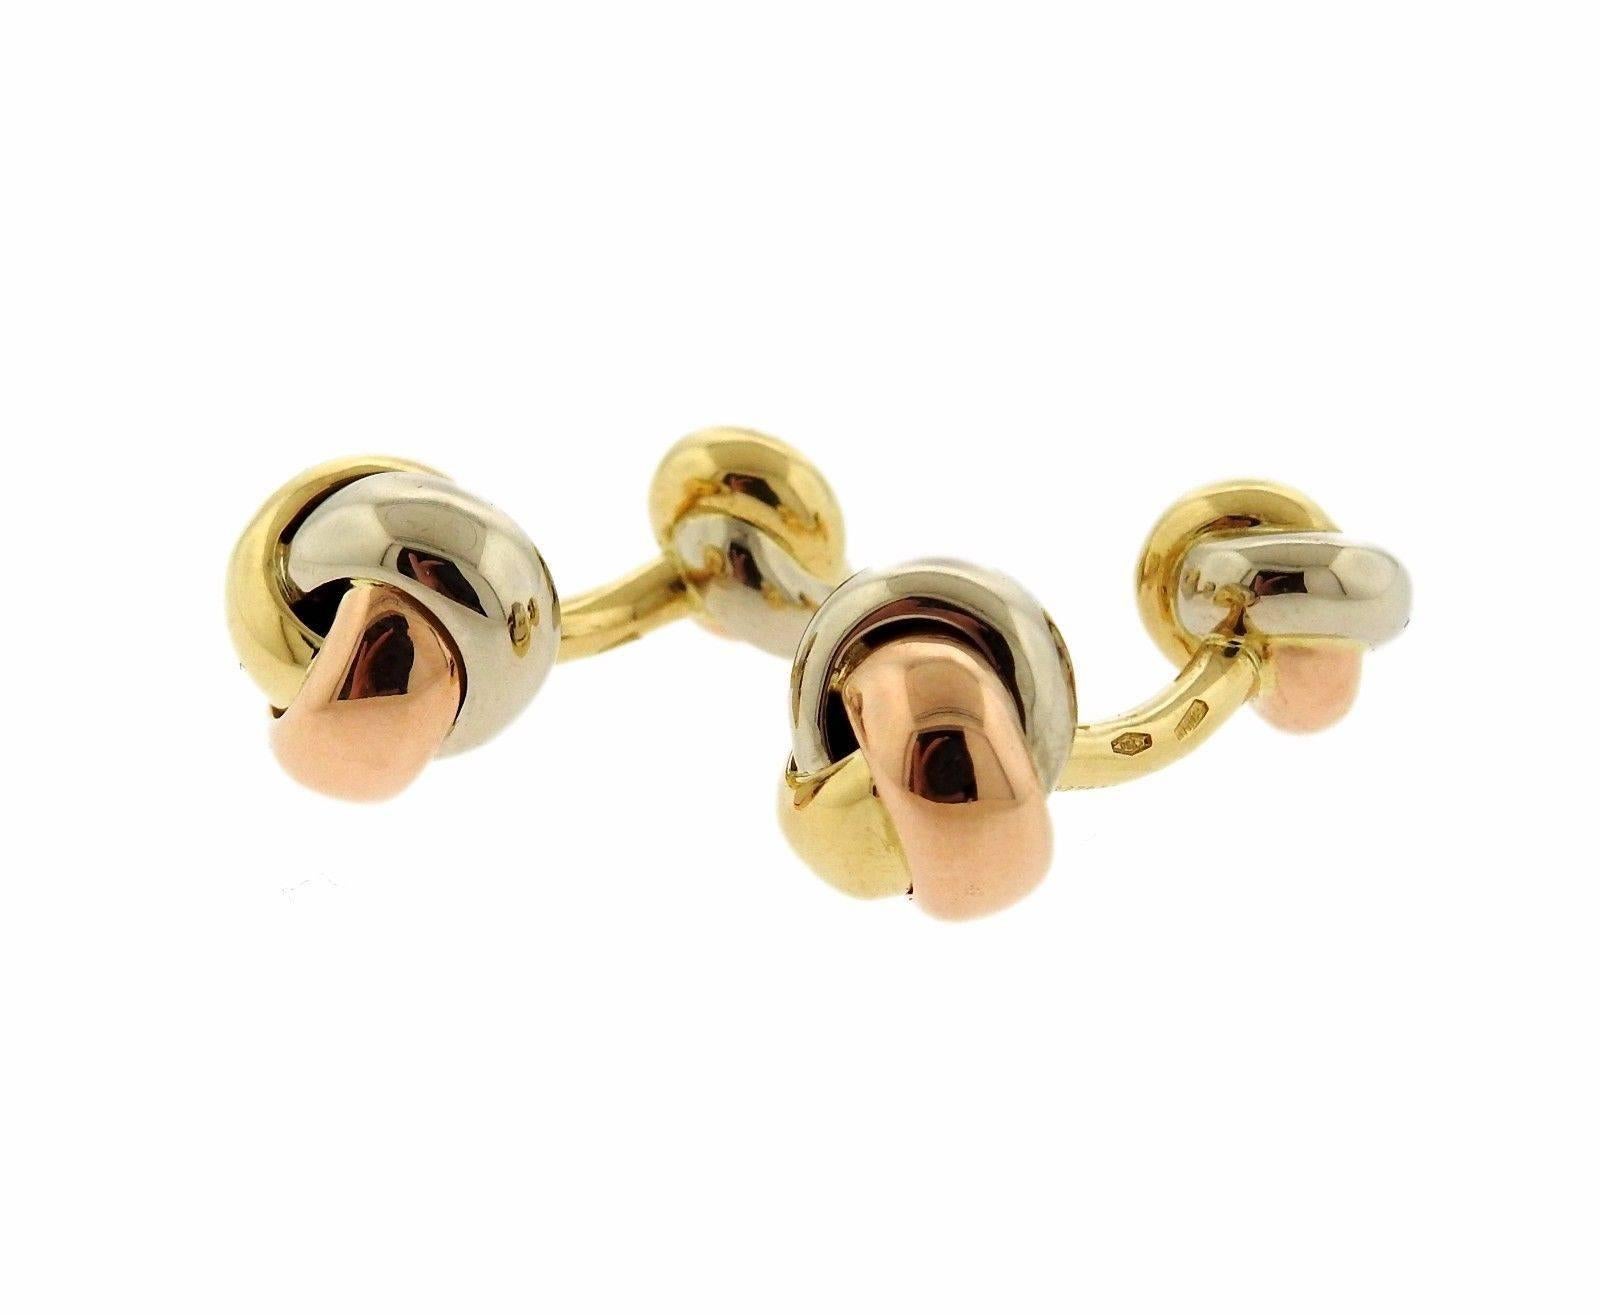 A pair of 18k white yellow and rose gold cufflinks by Cartier.  The cufflink tops measure 13.5mm in diameter.  The weight of the set is 19.3 grams. Marked: Cartier, 750, French Marks. Comes with Cartier Box.
